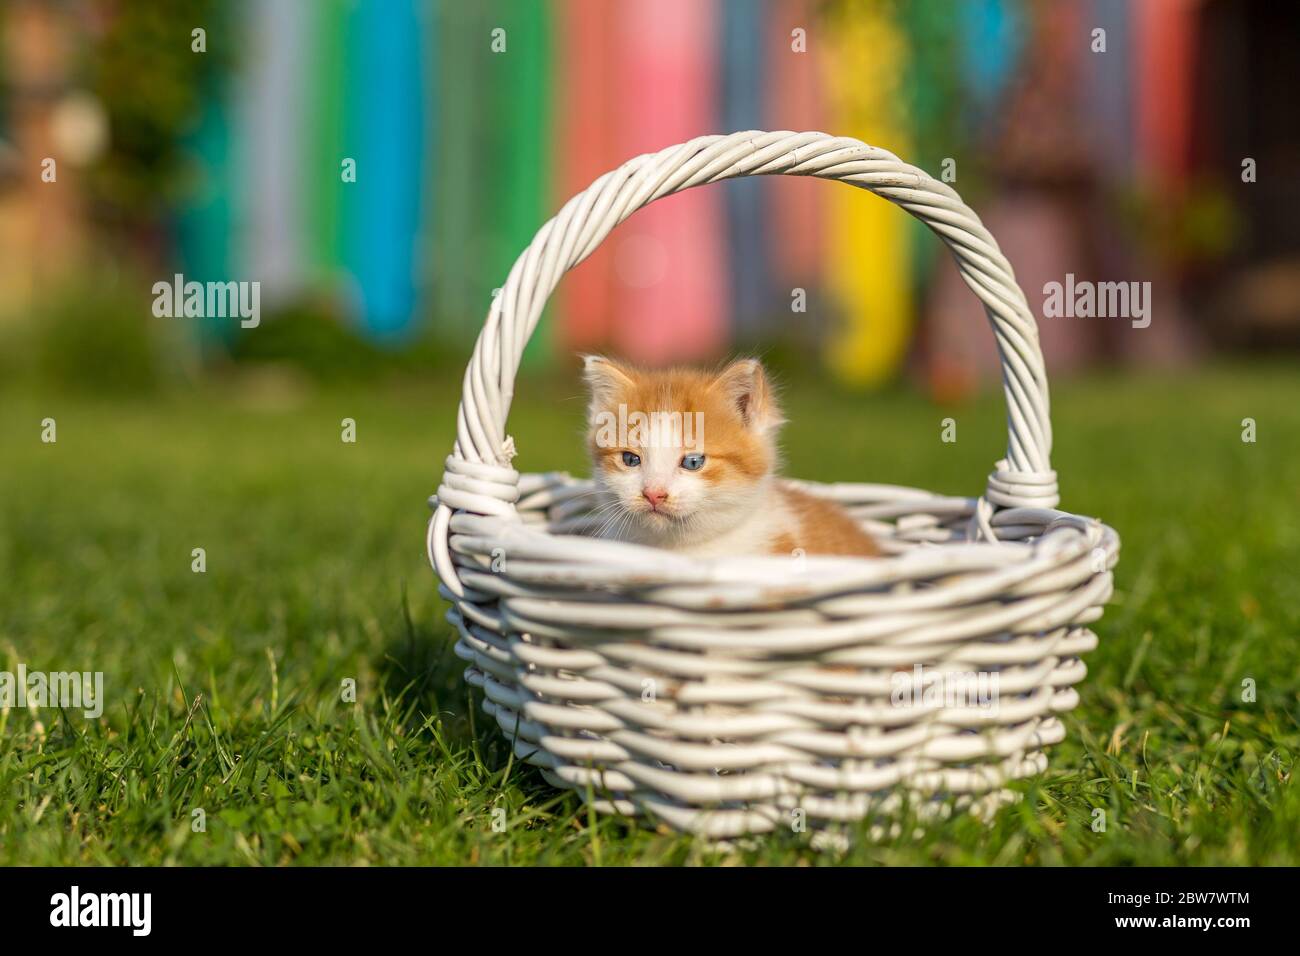 Ginger little kitten portrait in a beautiful white basket made from twigs on green grass in a colorful backyard. Funny domestic animals. Stock Photo